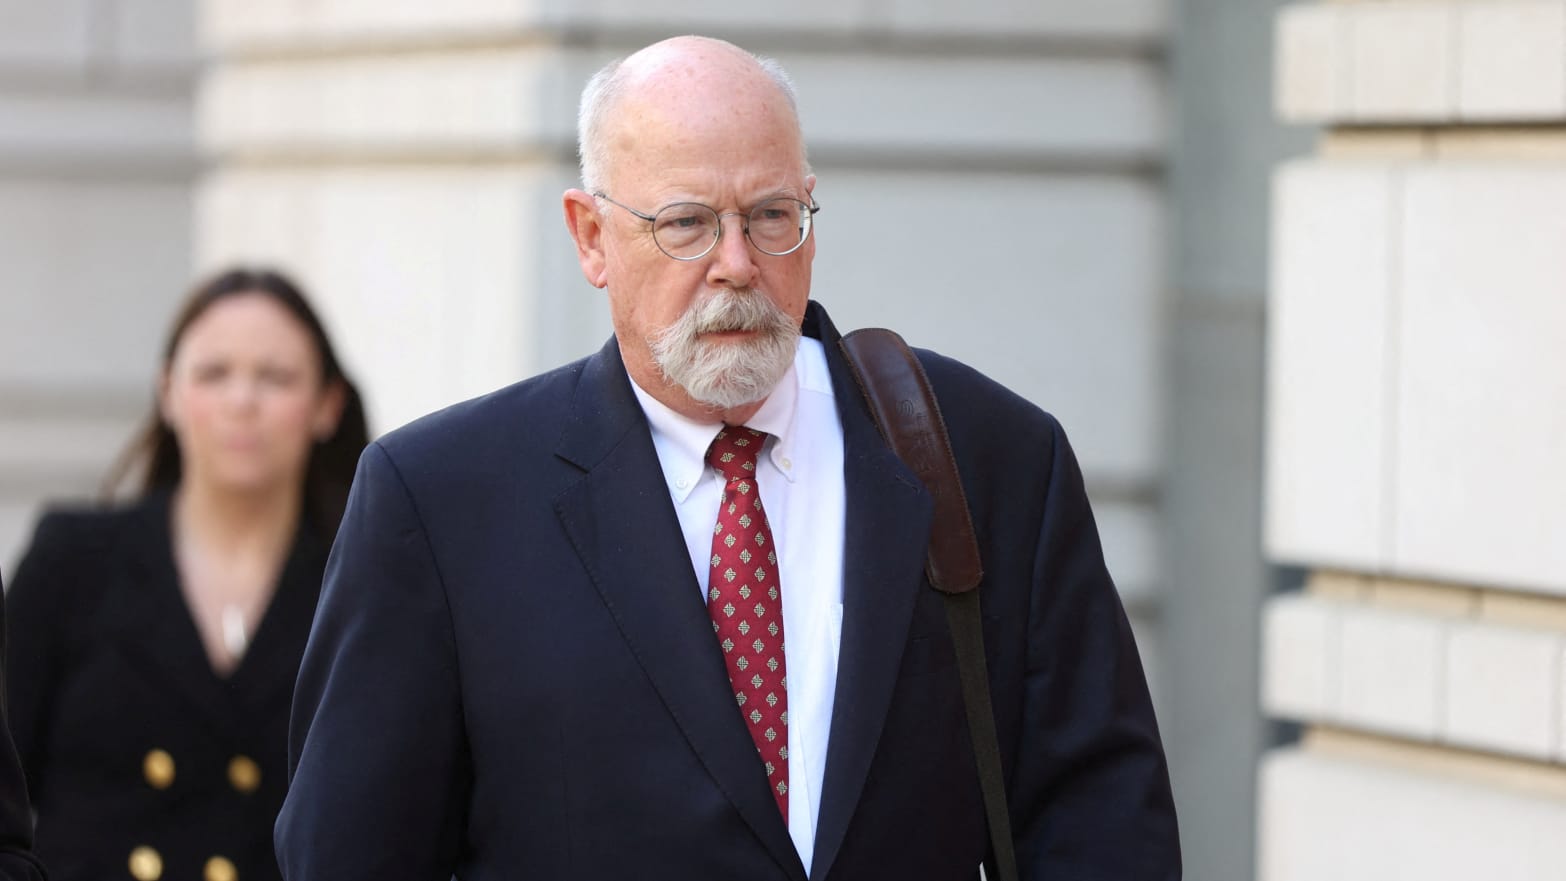 Special Counsel John Durham departs the U.S. Federal Courthouse in Washington, U.S. May 17, 2022.